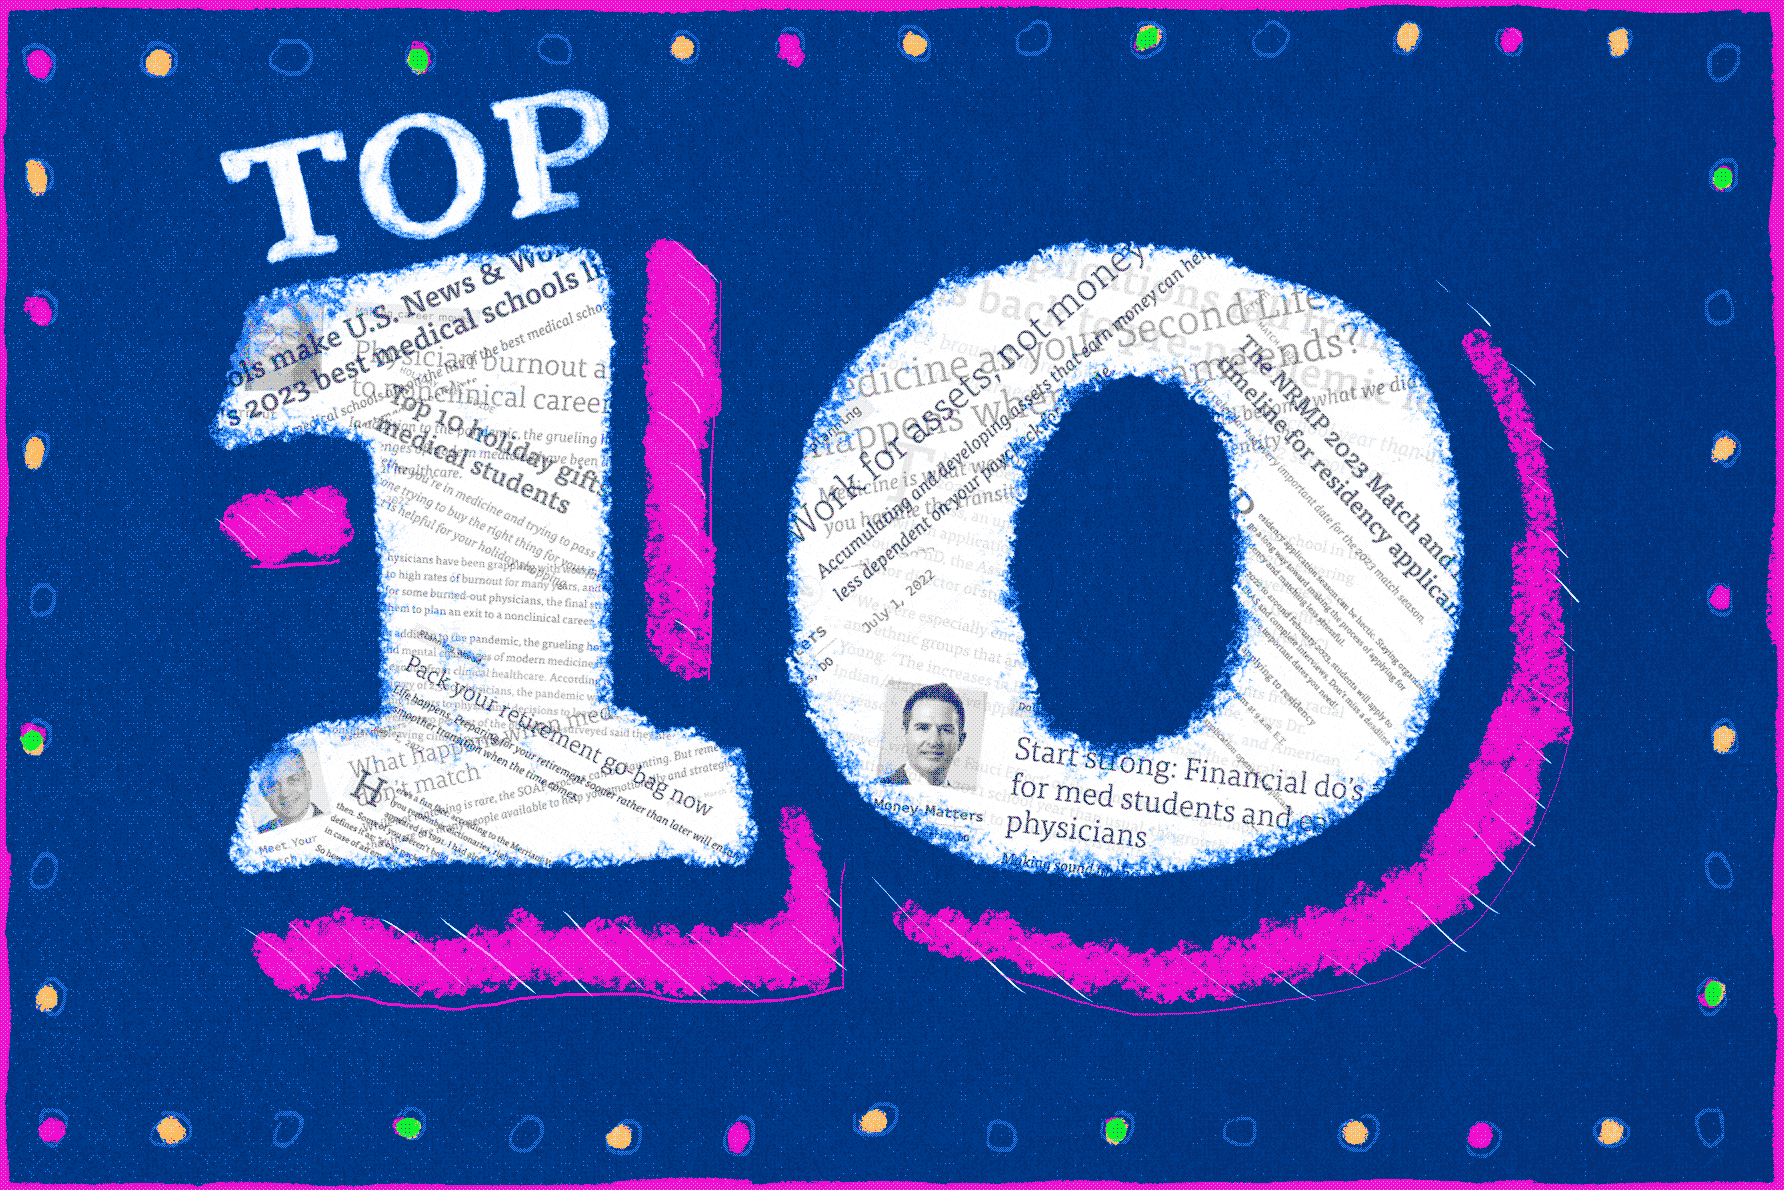 The DO's top 10 of - The DO